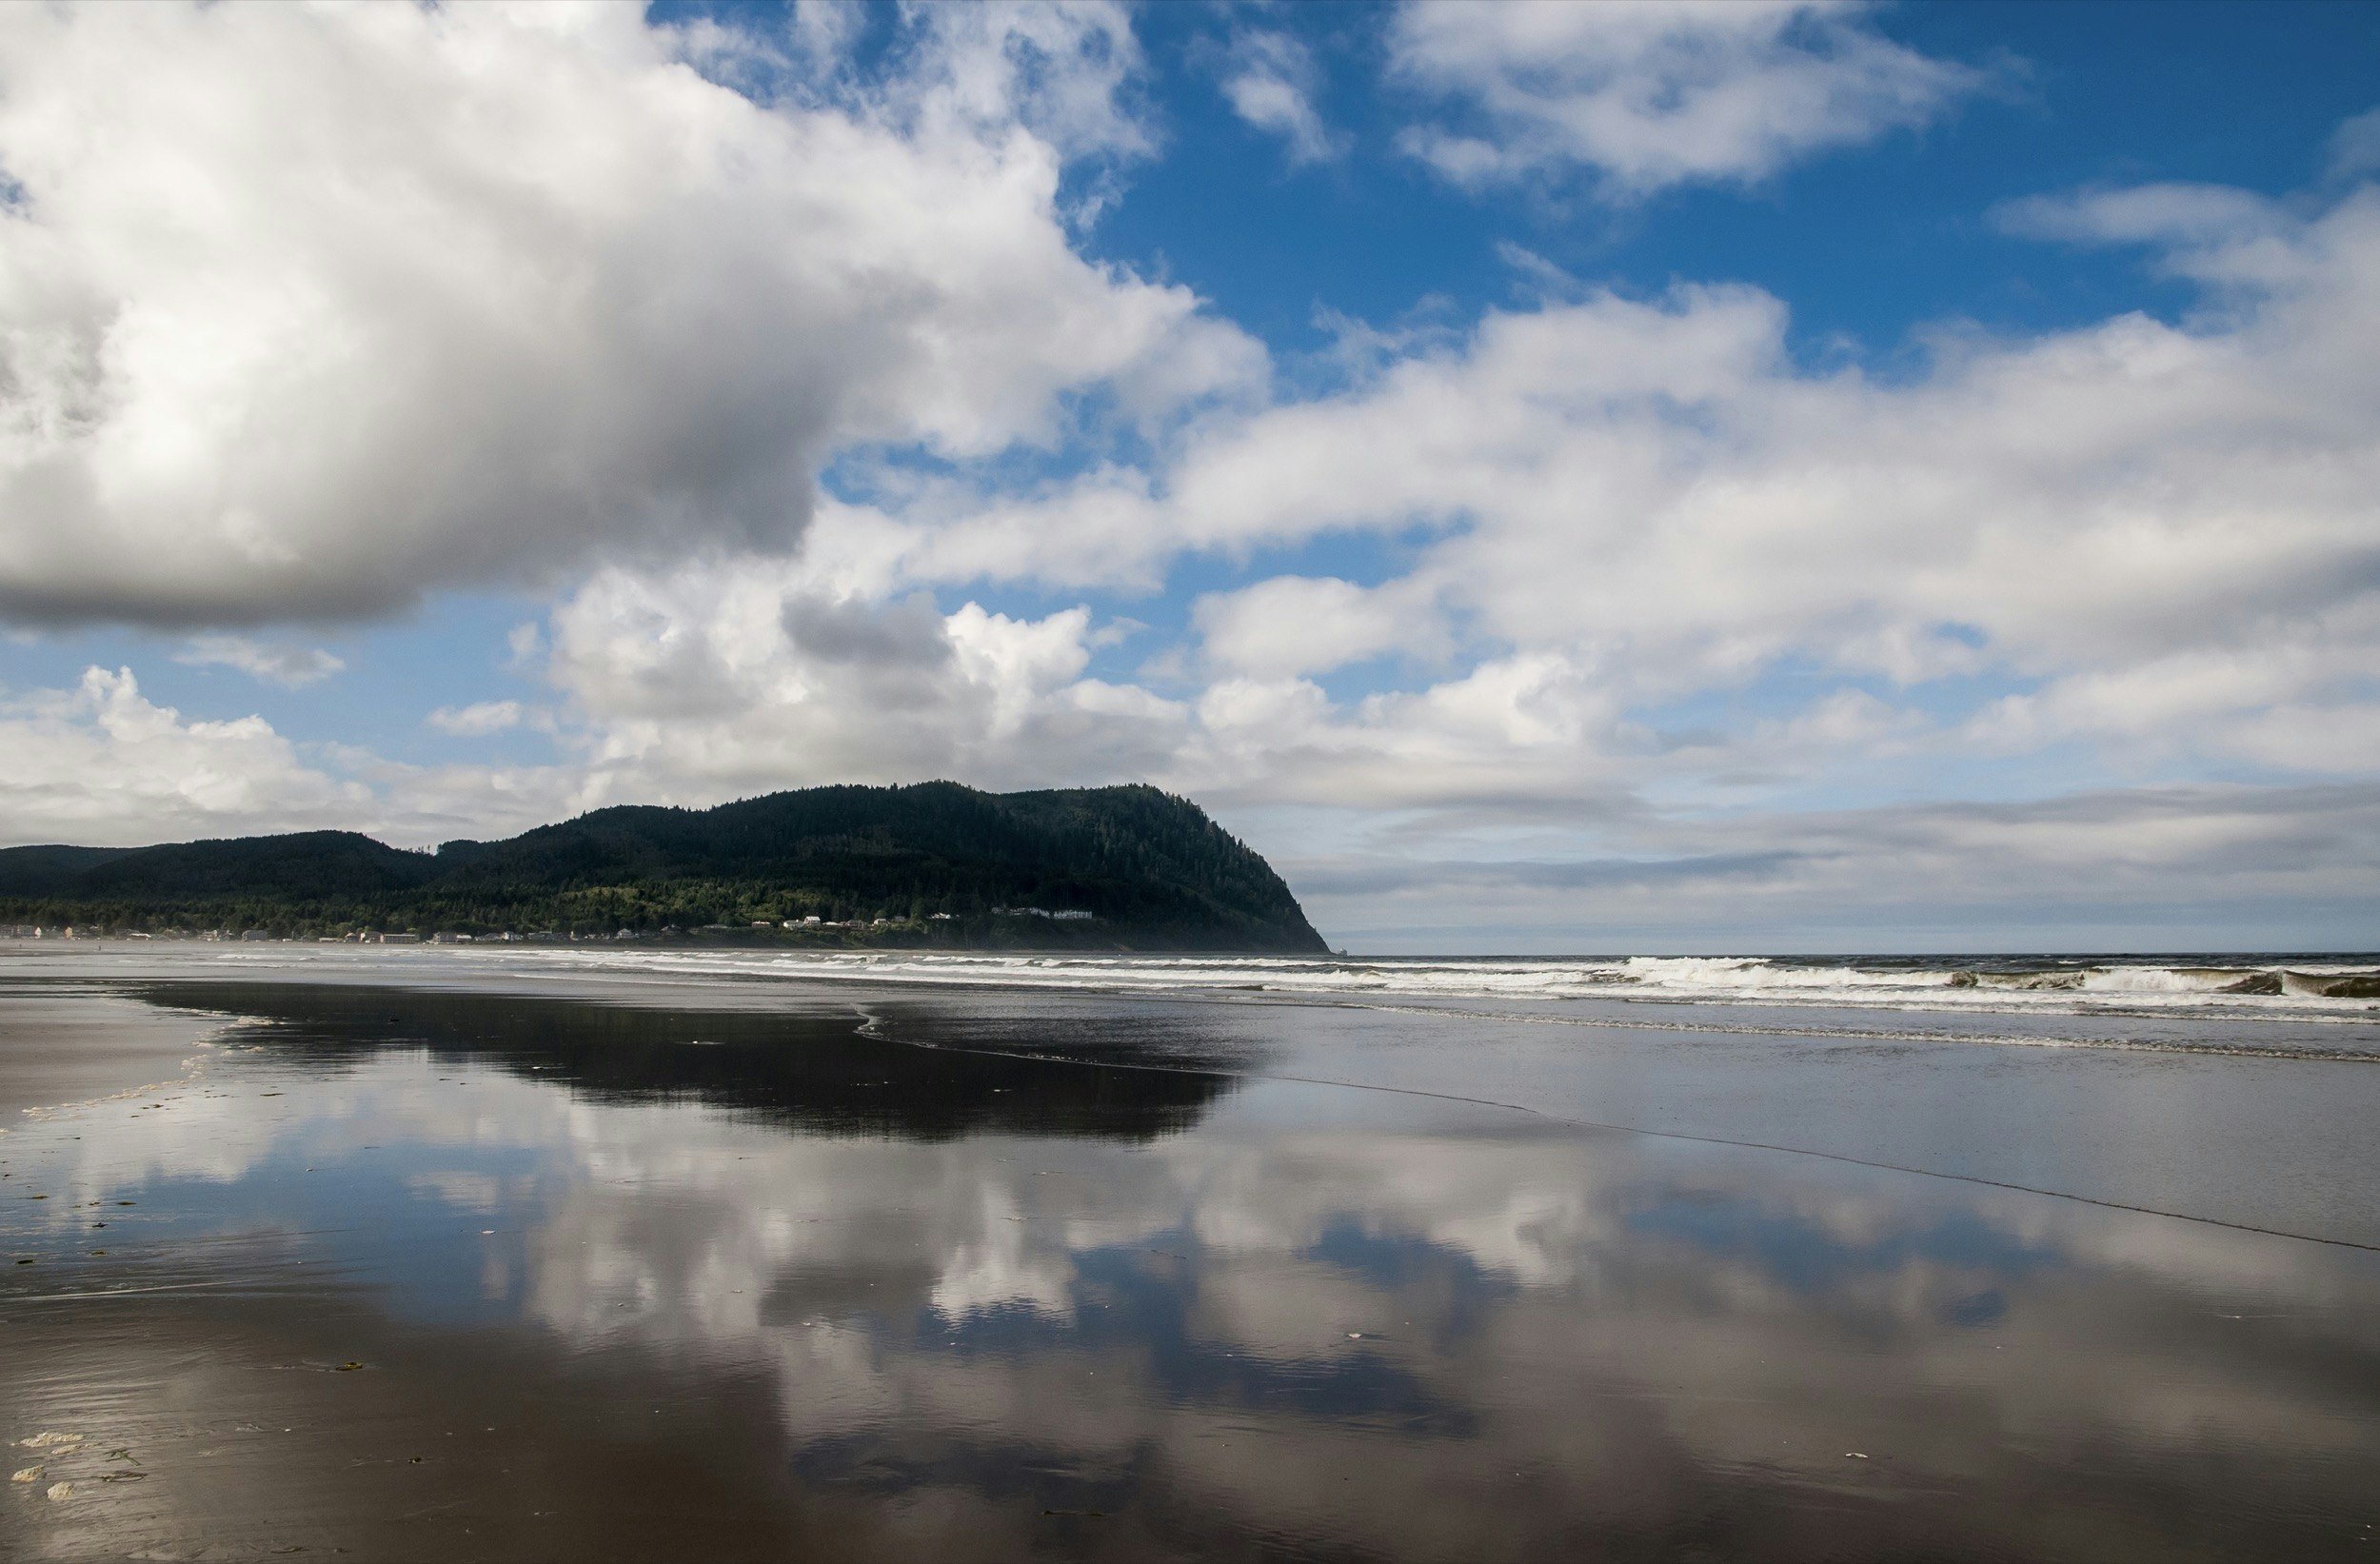 Tillamook Head is reflected in the water on a beach off the coast of Oregon